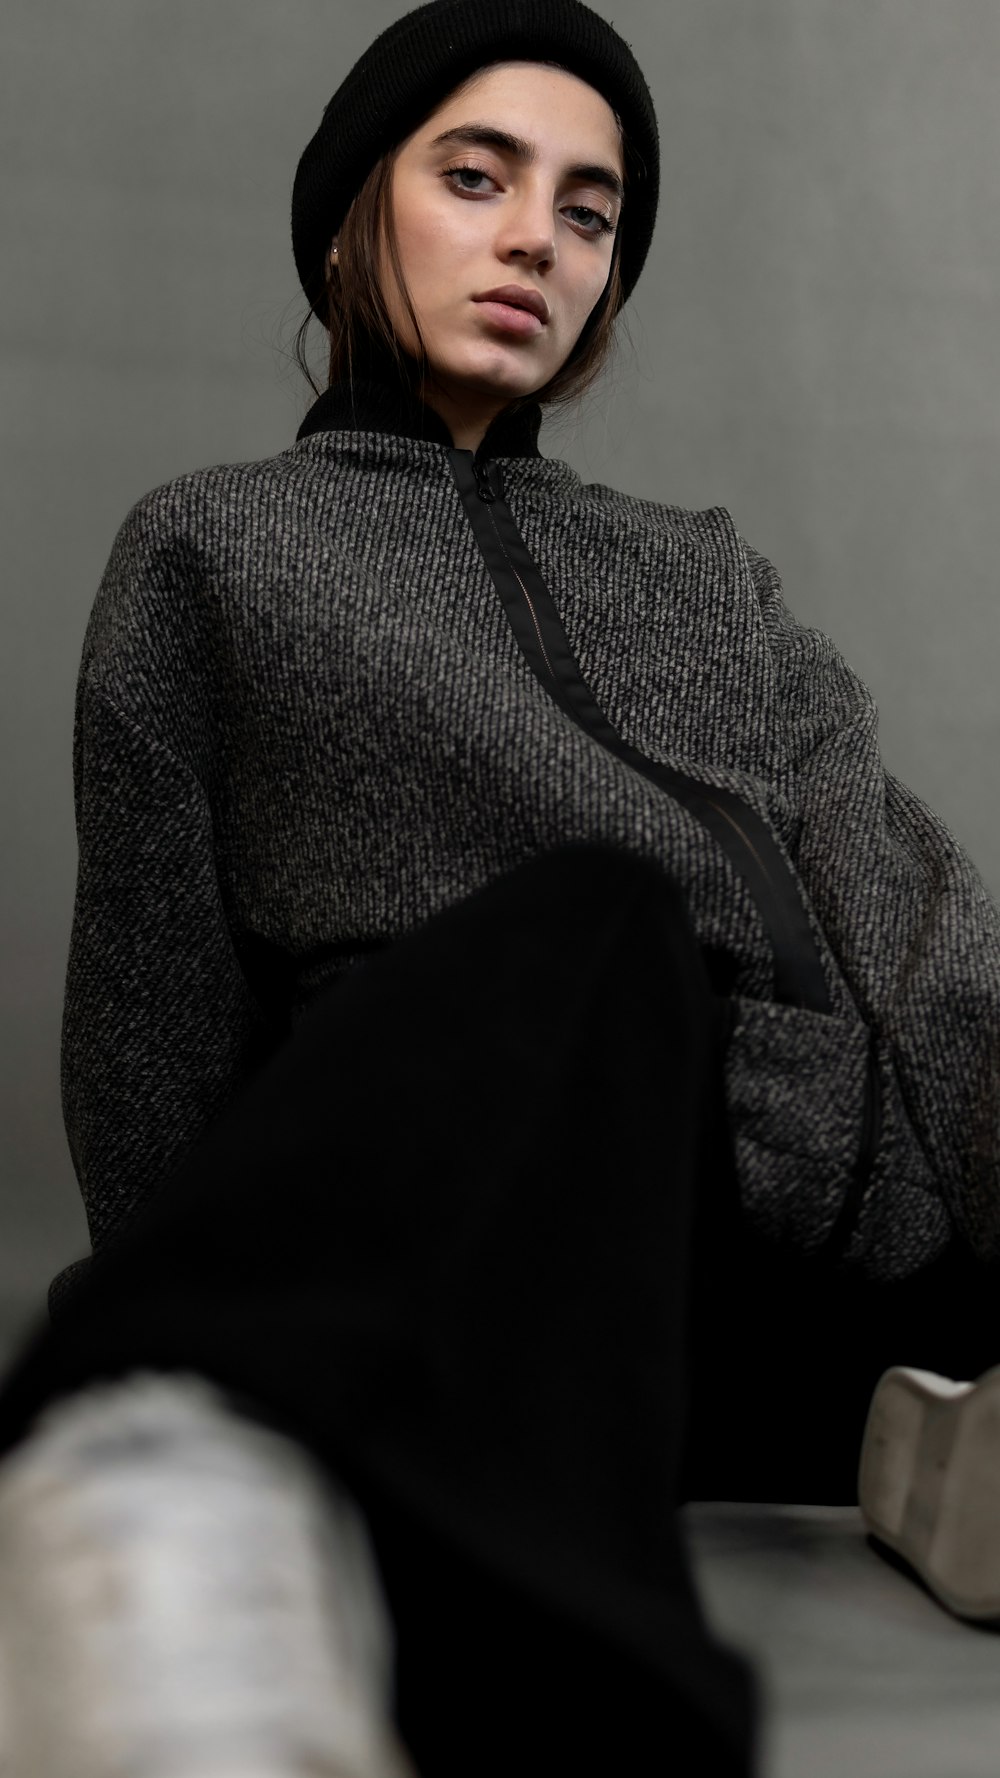 woman in gray sweater sitting on chair